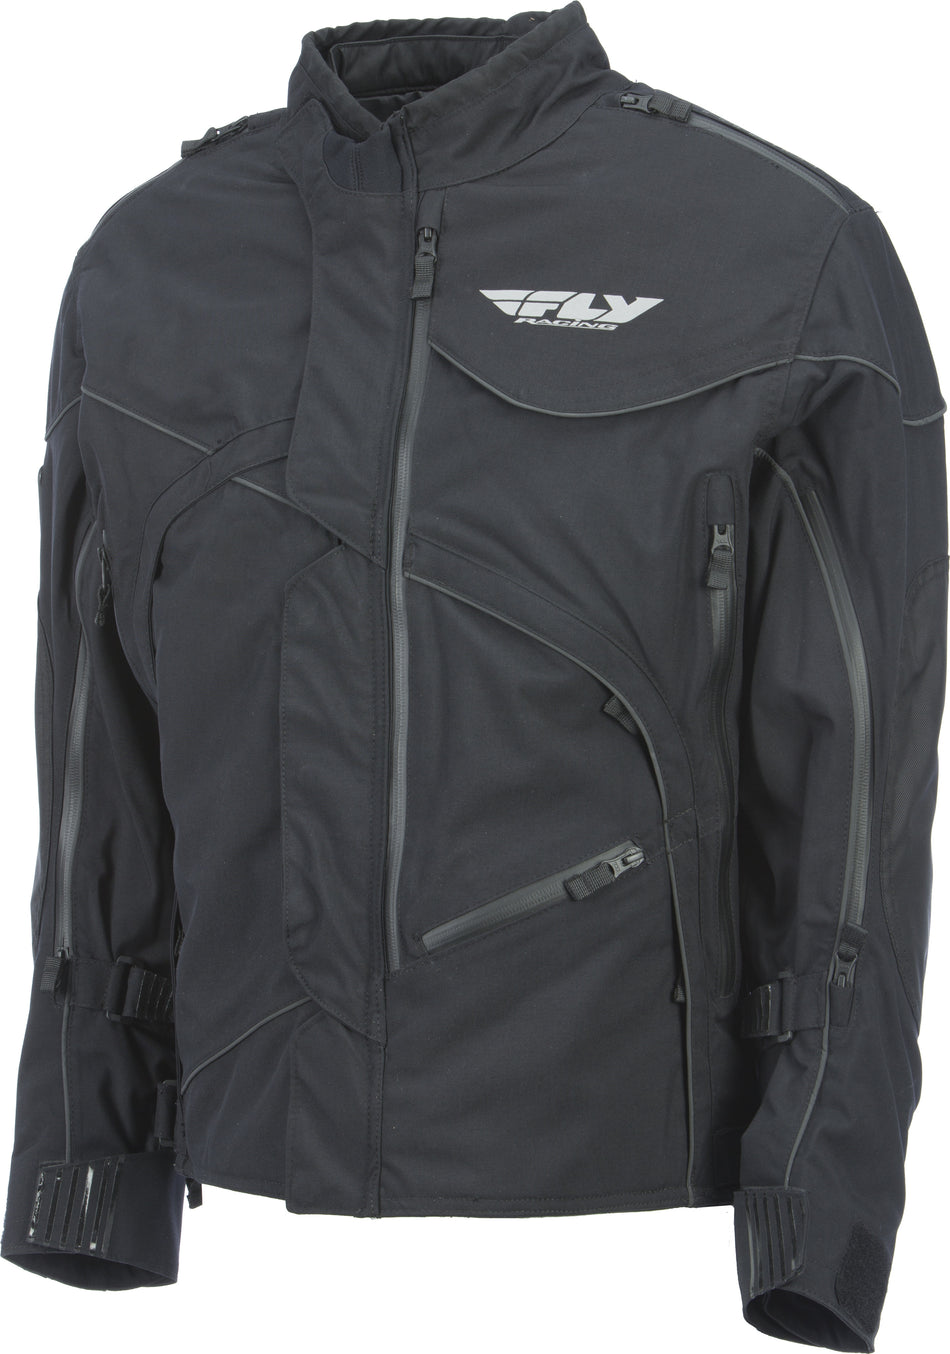 FLY RACING Fly Patrol Xc Jacket Blk Sm 368-9200S